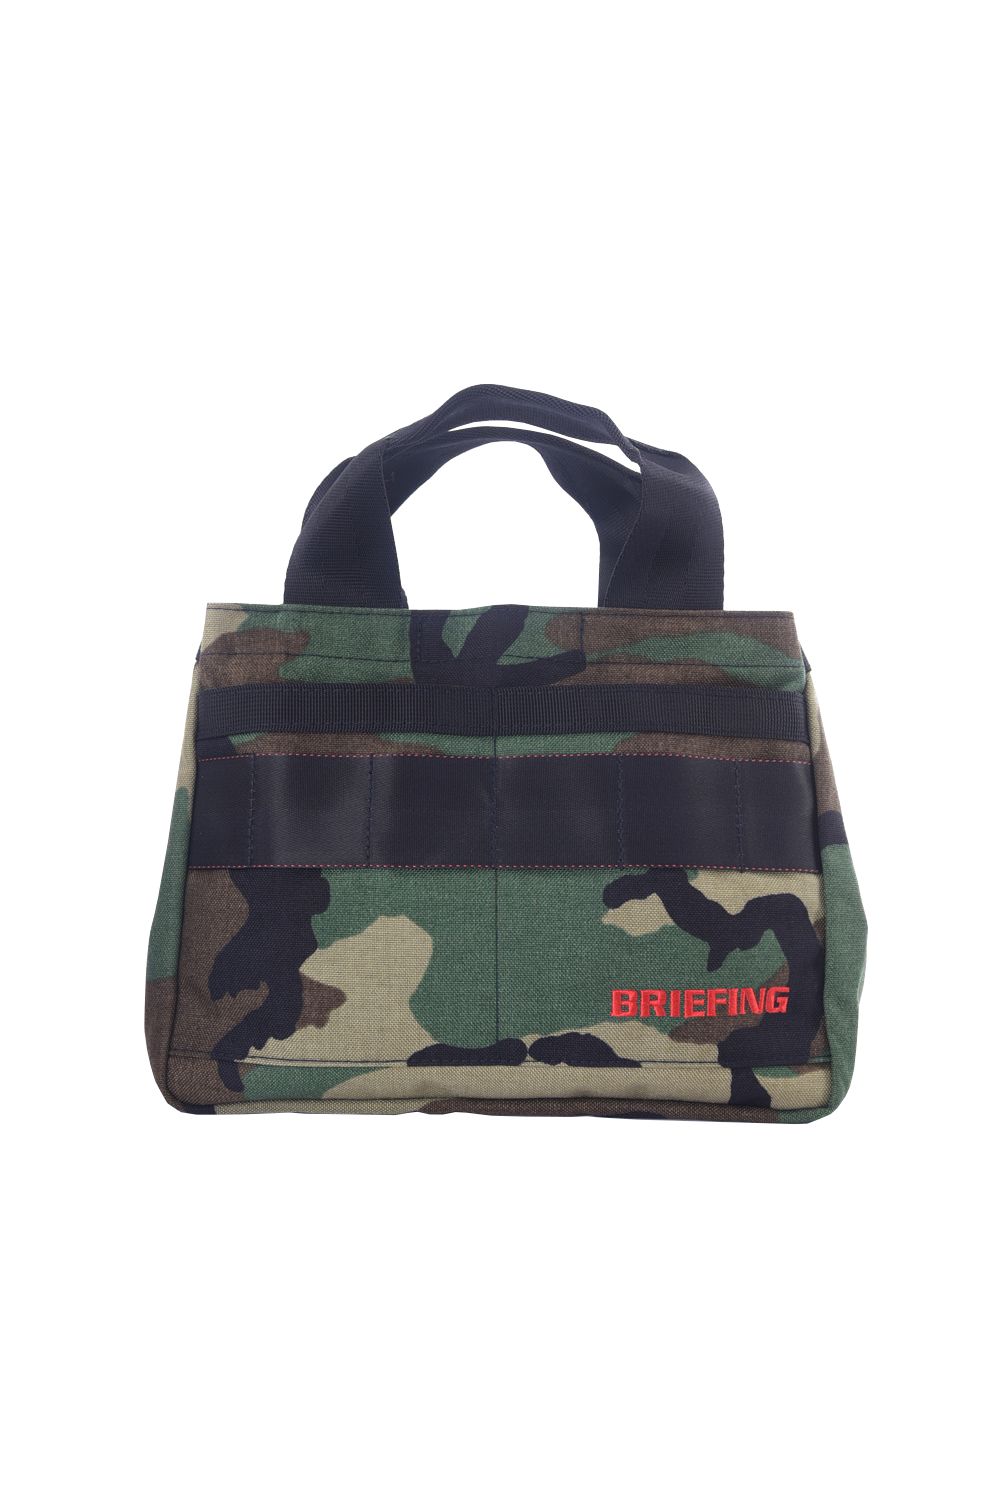 BRIEFING - 【1000Dコーデュラナイロン】 CART TOTE / カートバッグ ...